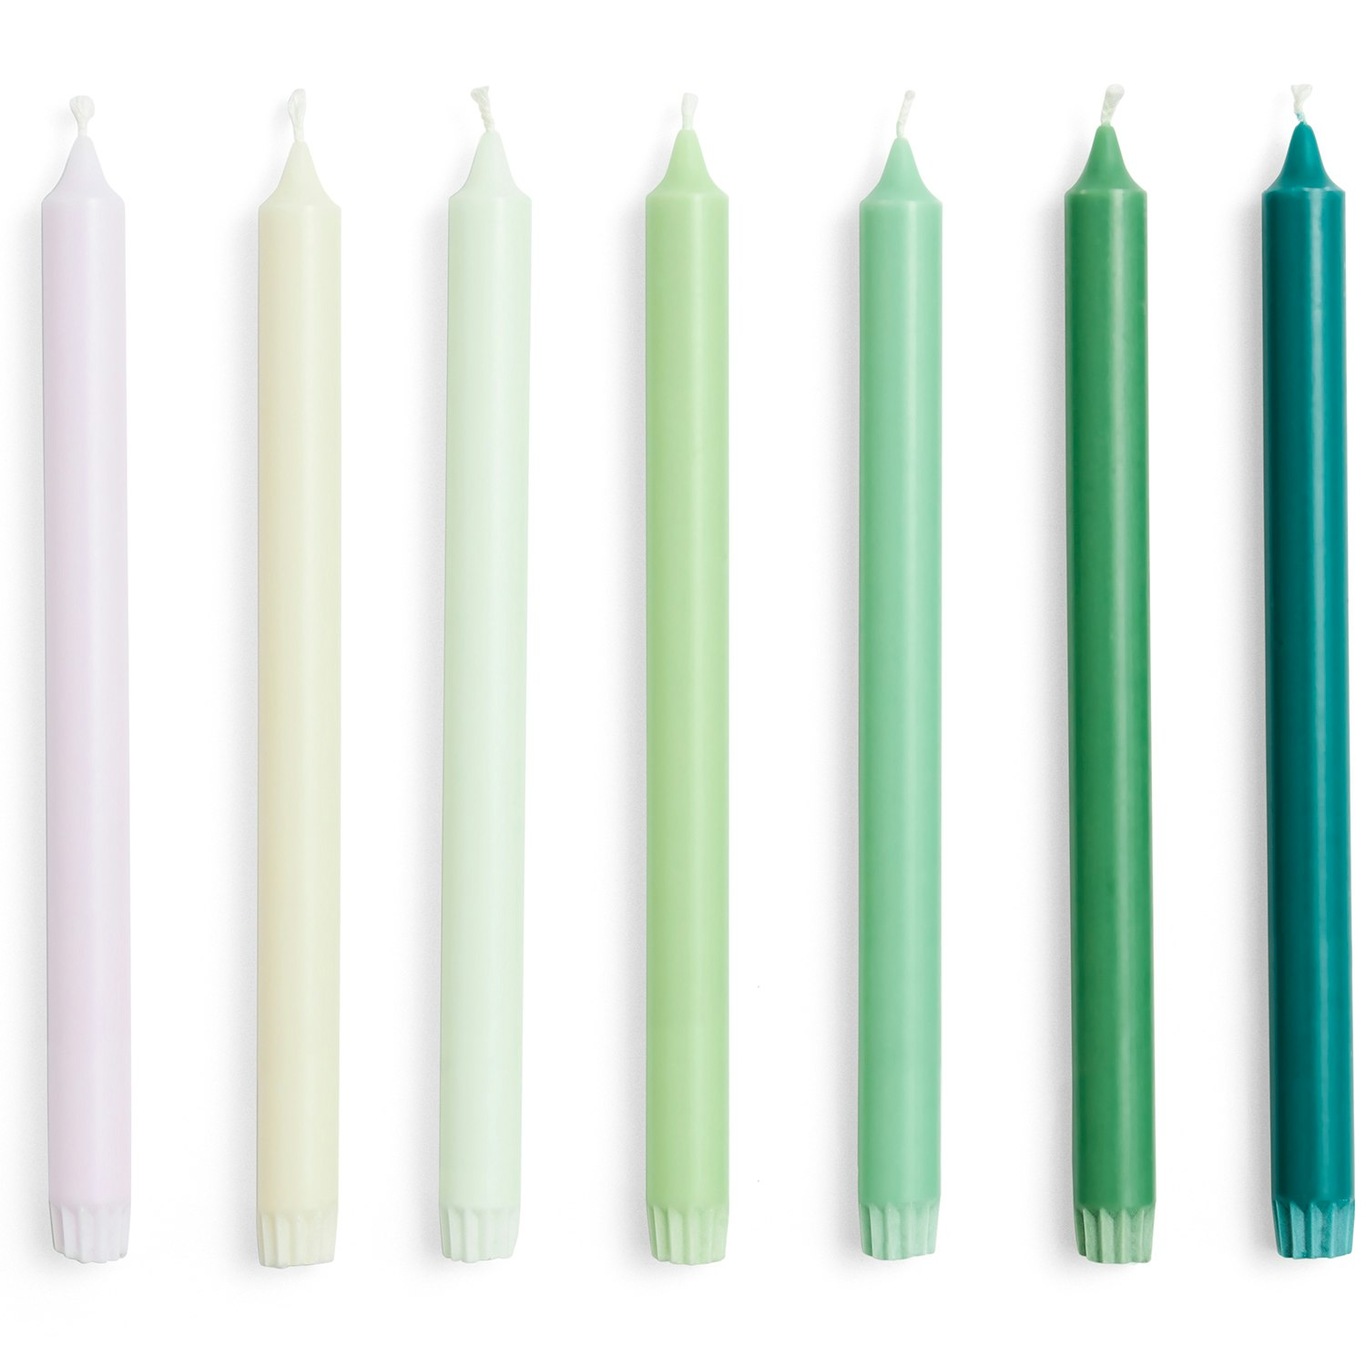 Gradient Candles 7-pack, Green